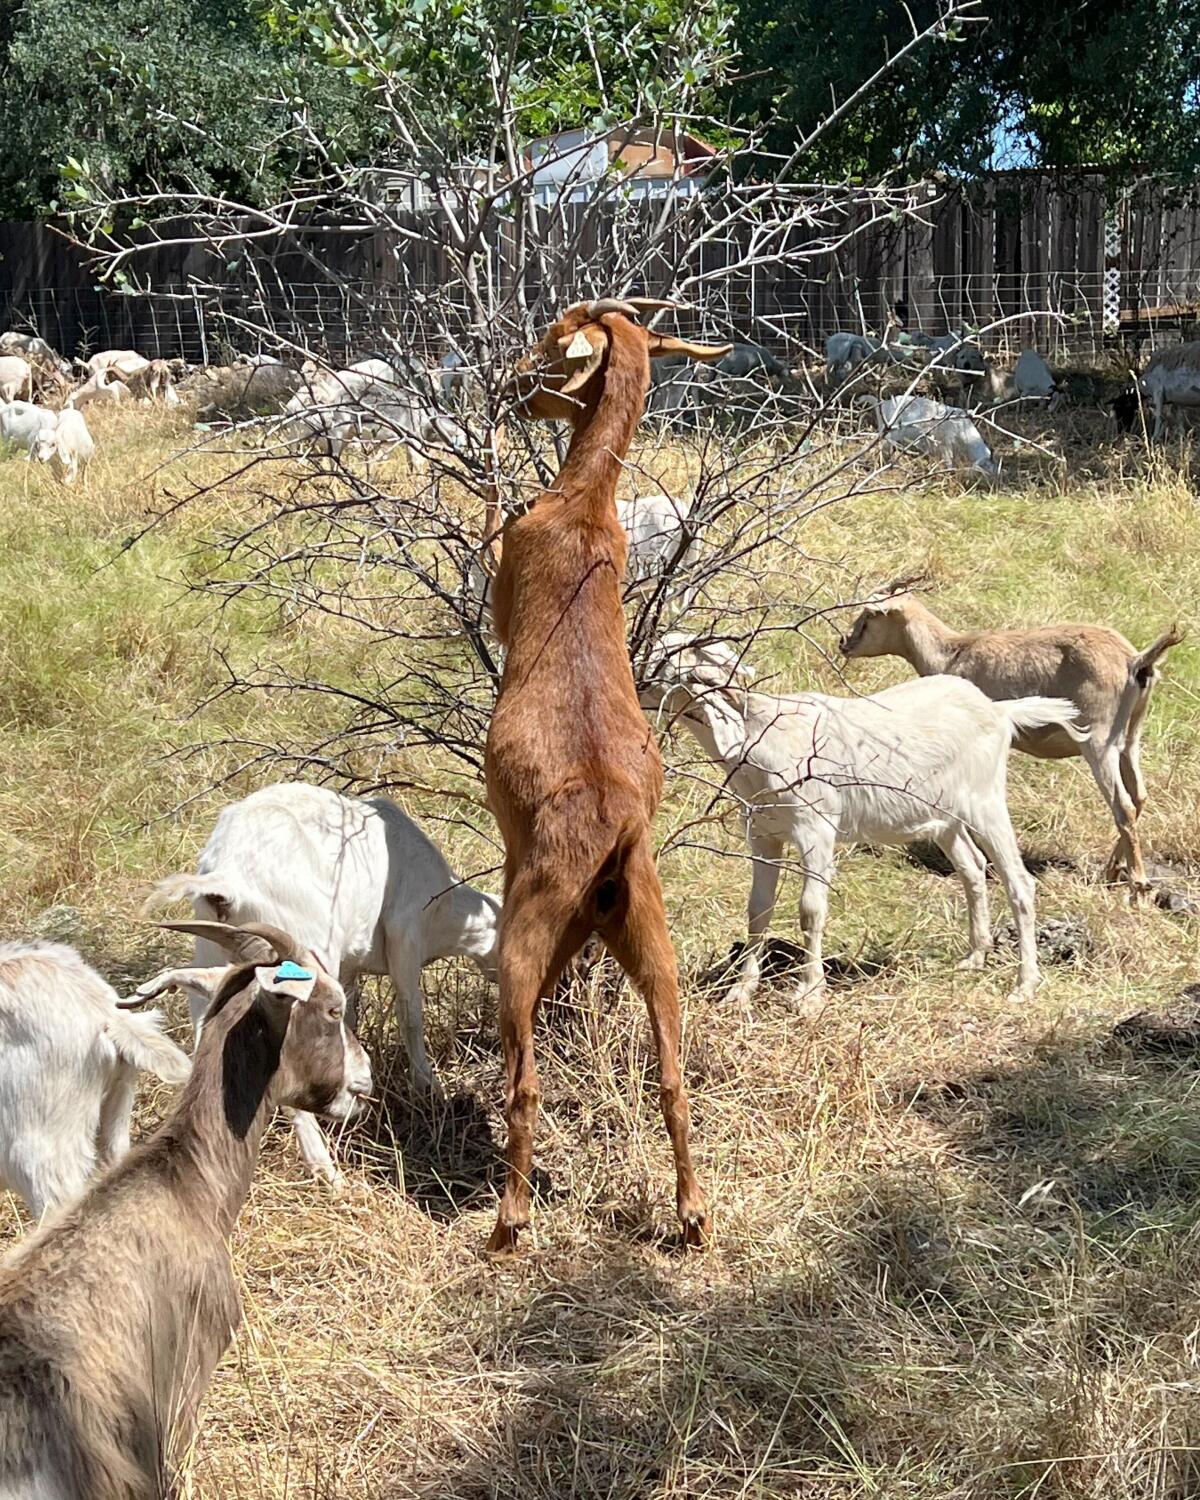 A pack of goats grazes on dry gras. One stands on its hind legs eating a shrub.